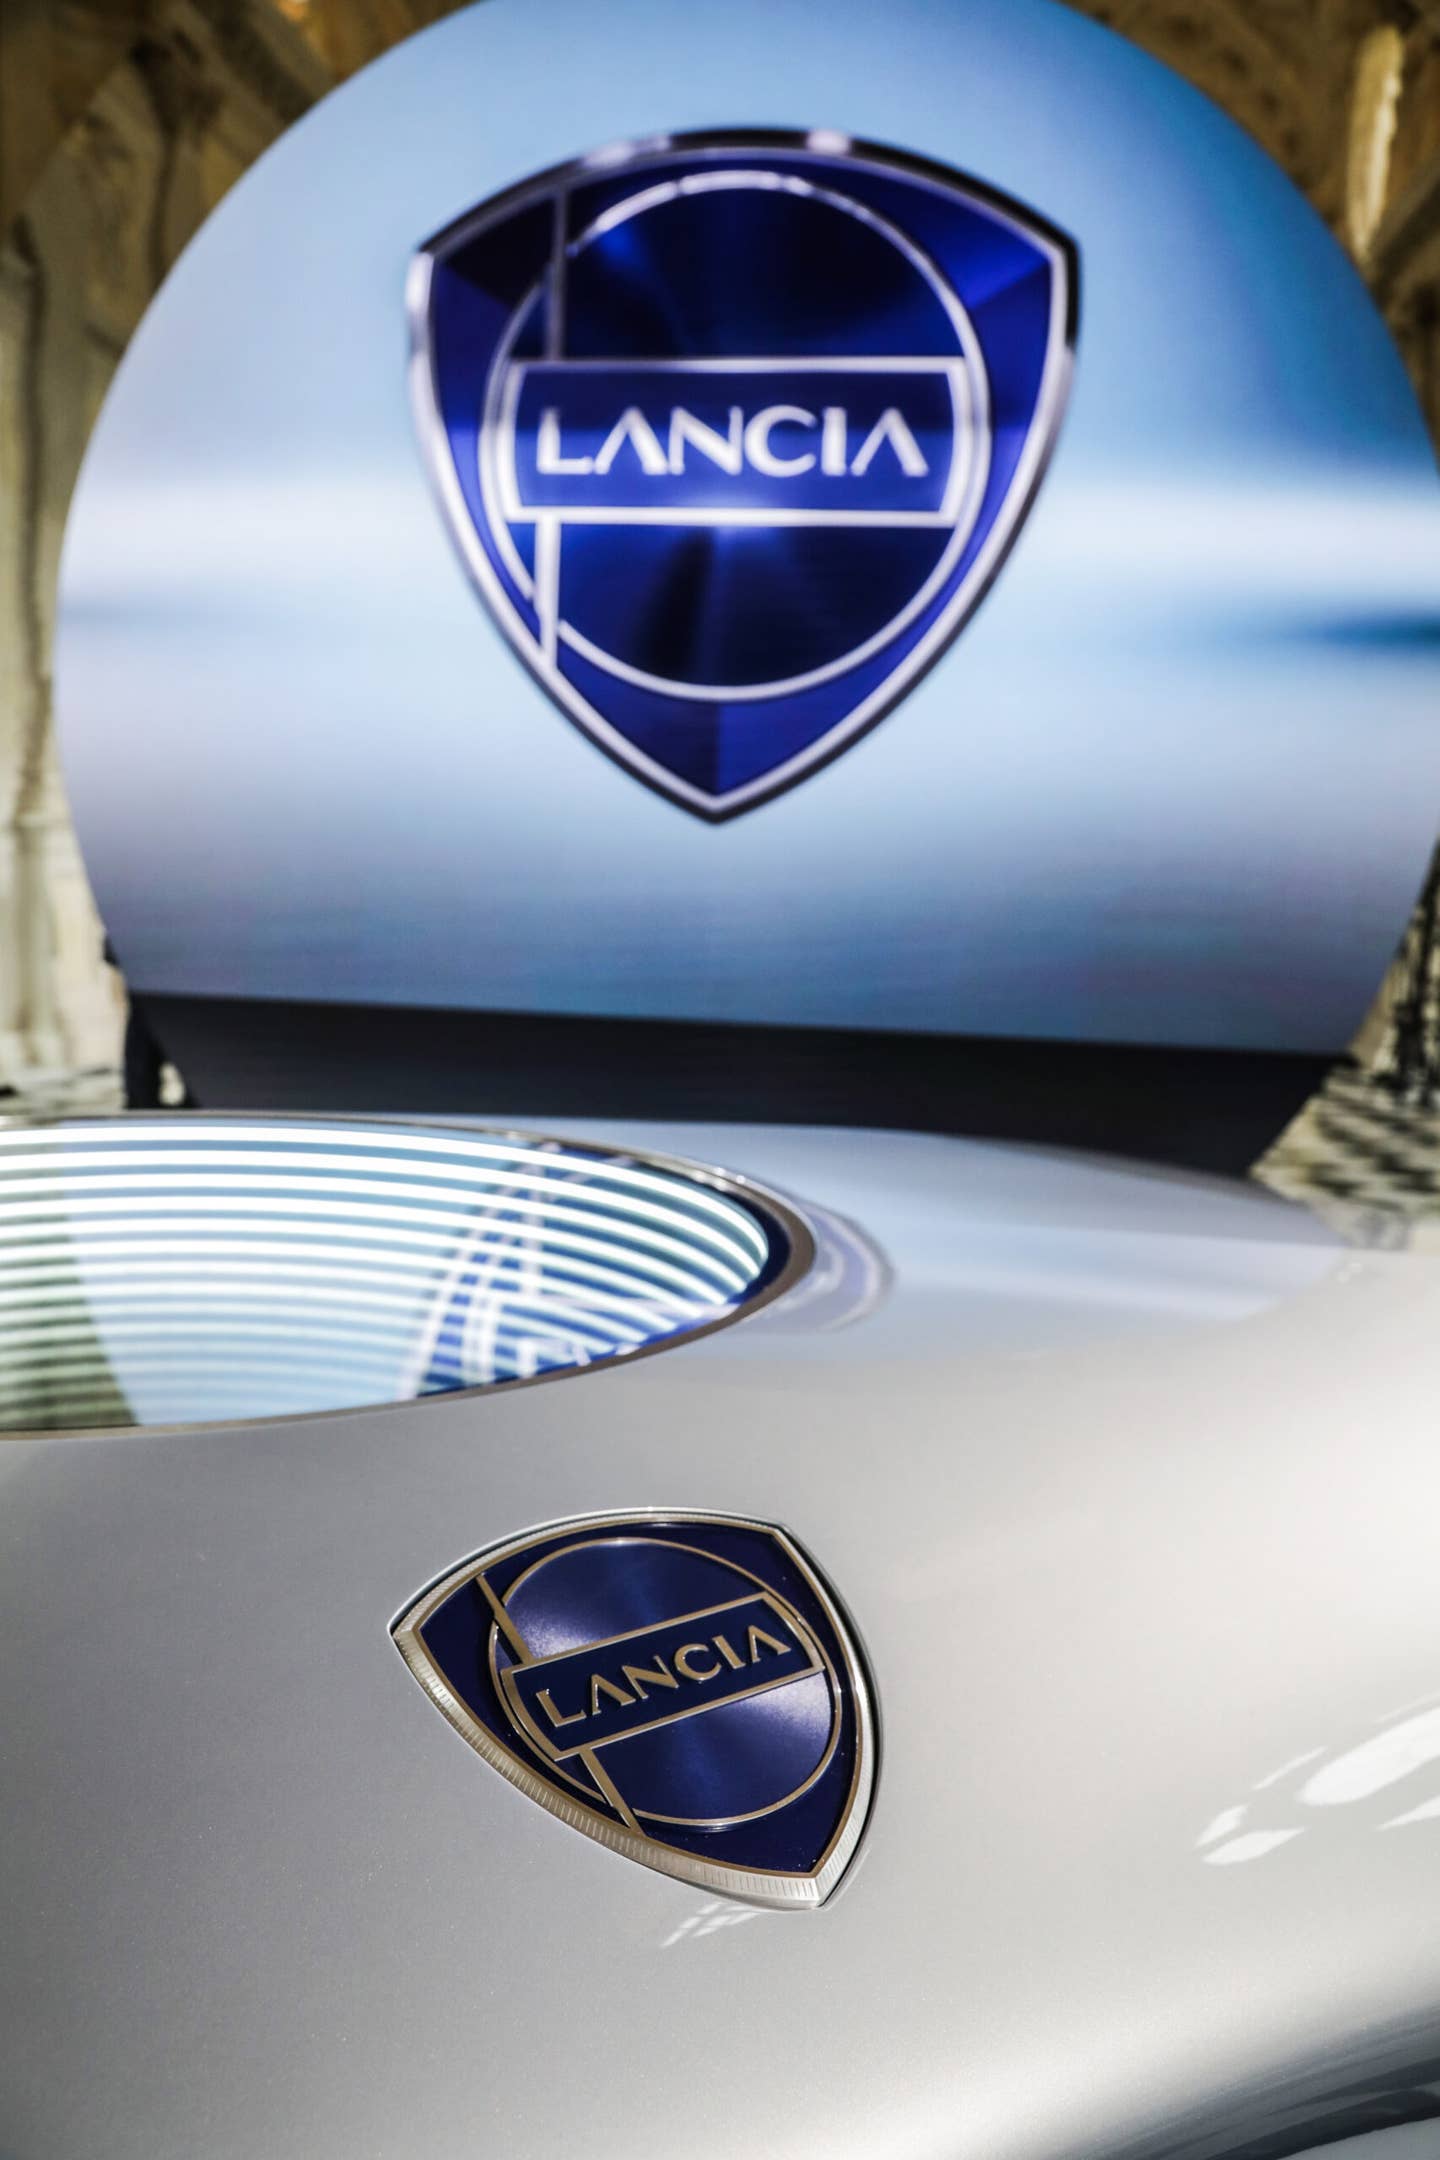 The logo features a lance, because that's what Lancia means in Italian. <em>Lancia</em>